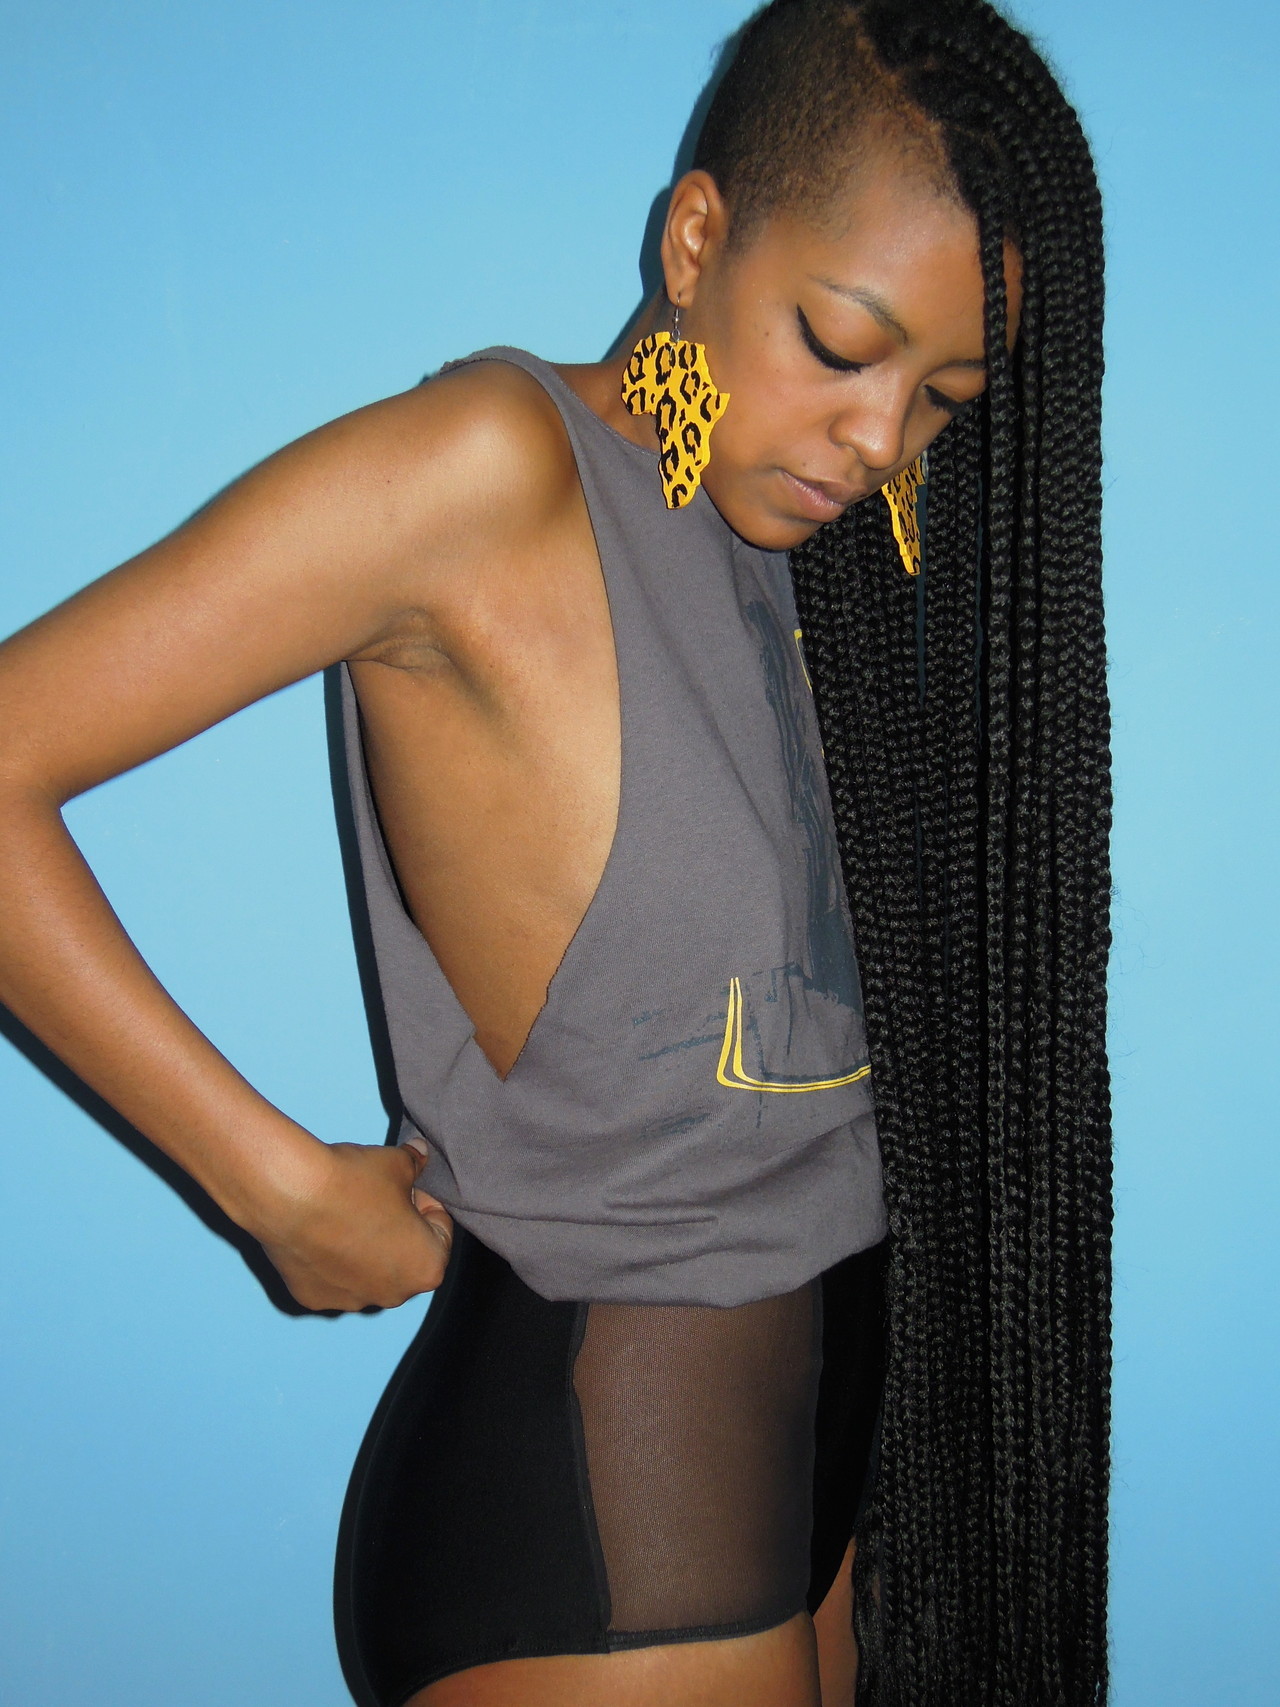 Box Braids with Shaved Sides